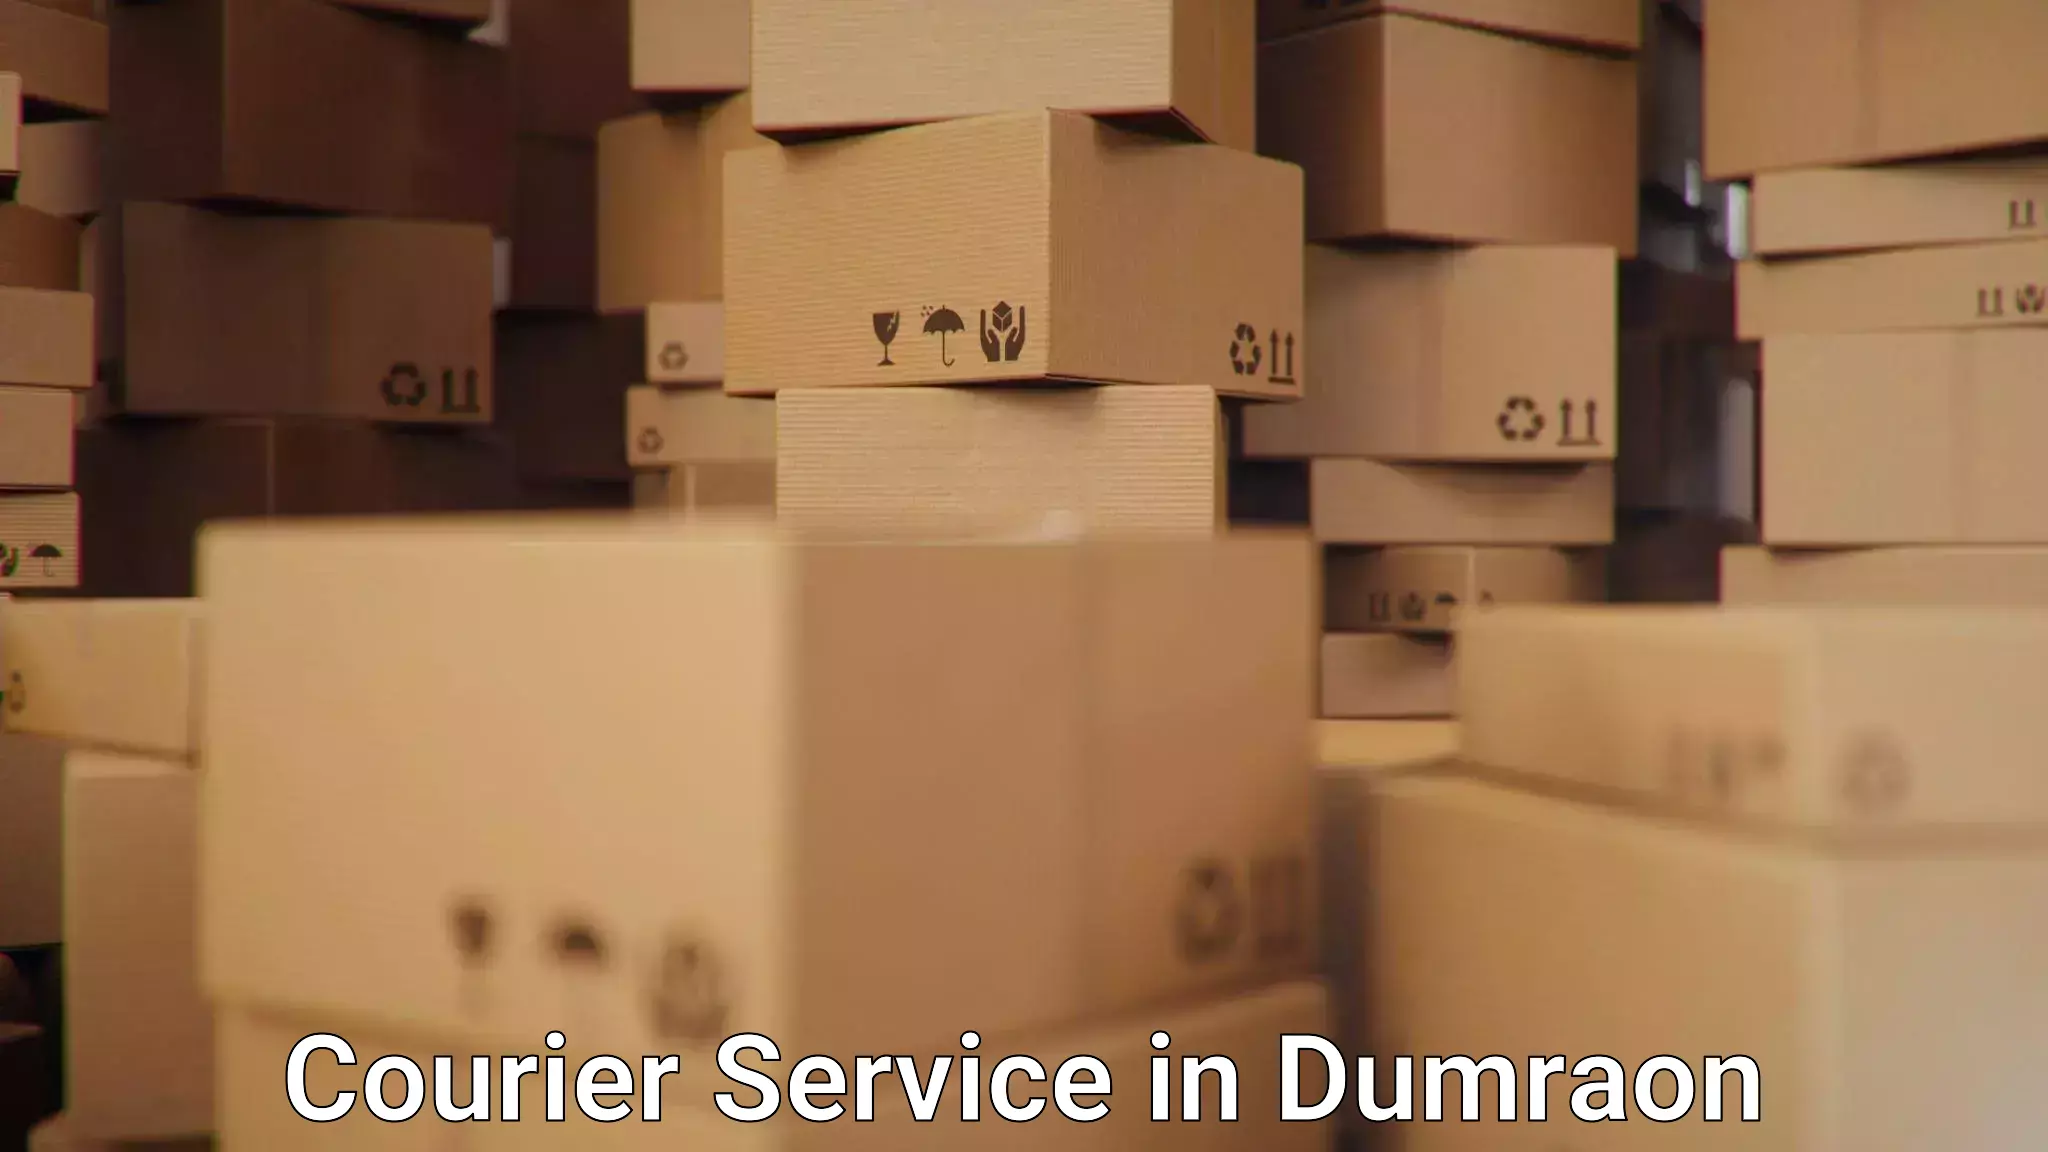 Online package tracking in Dumraon